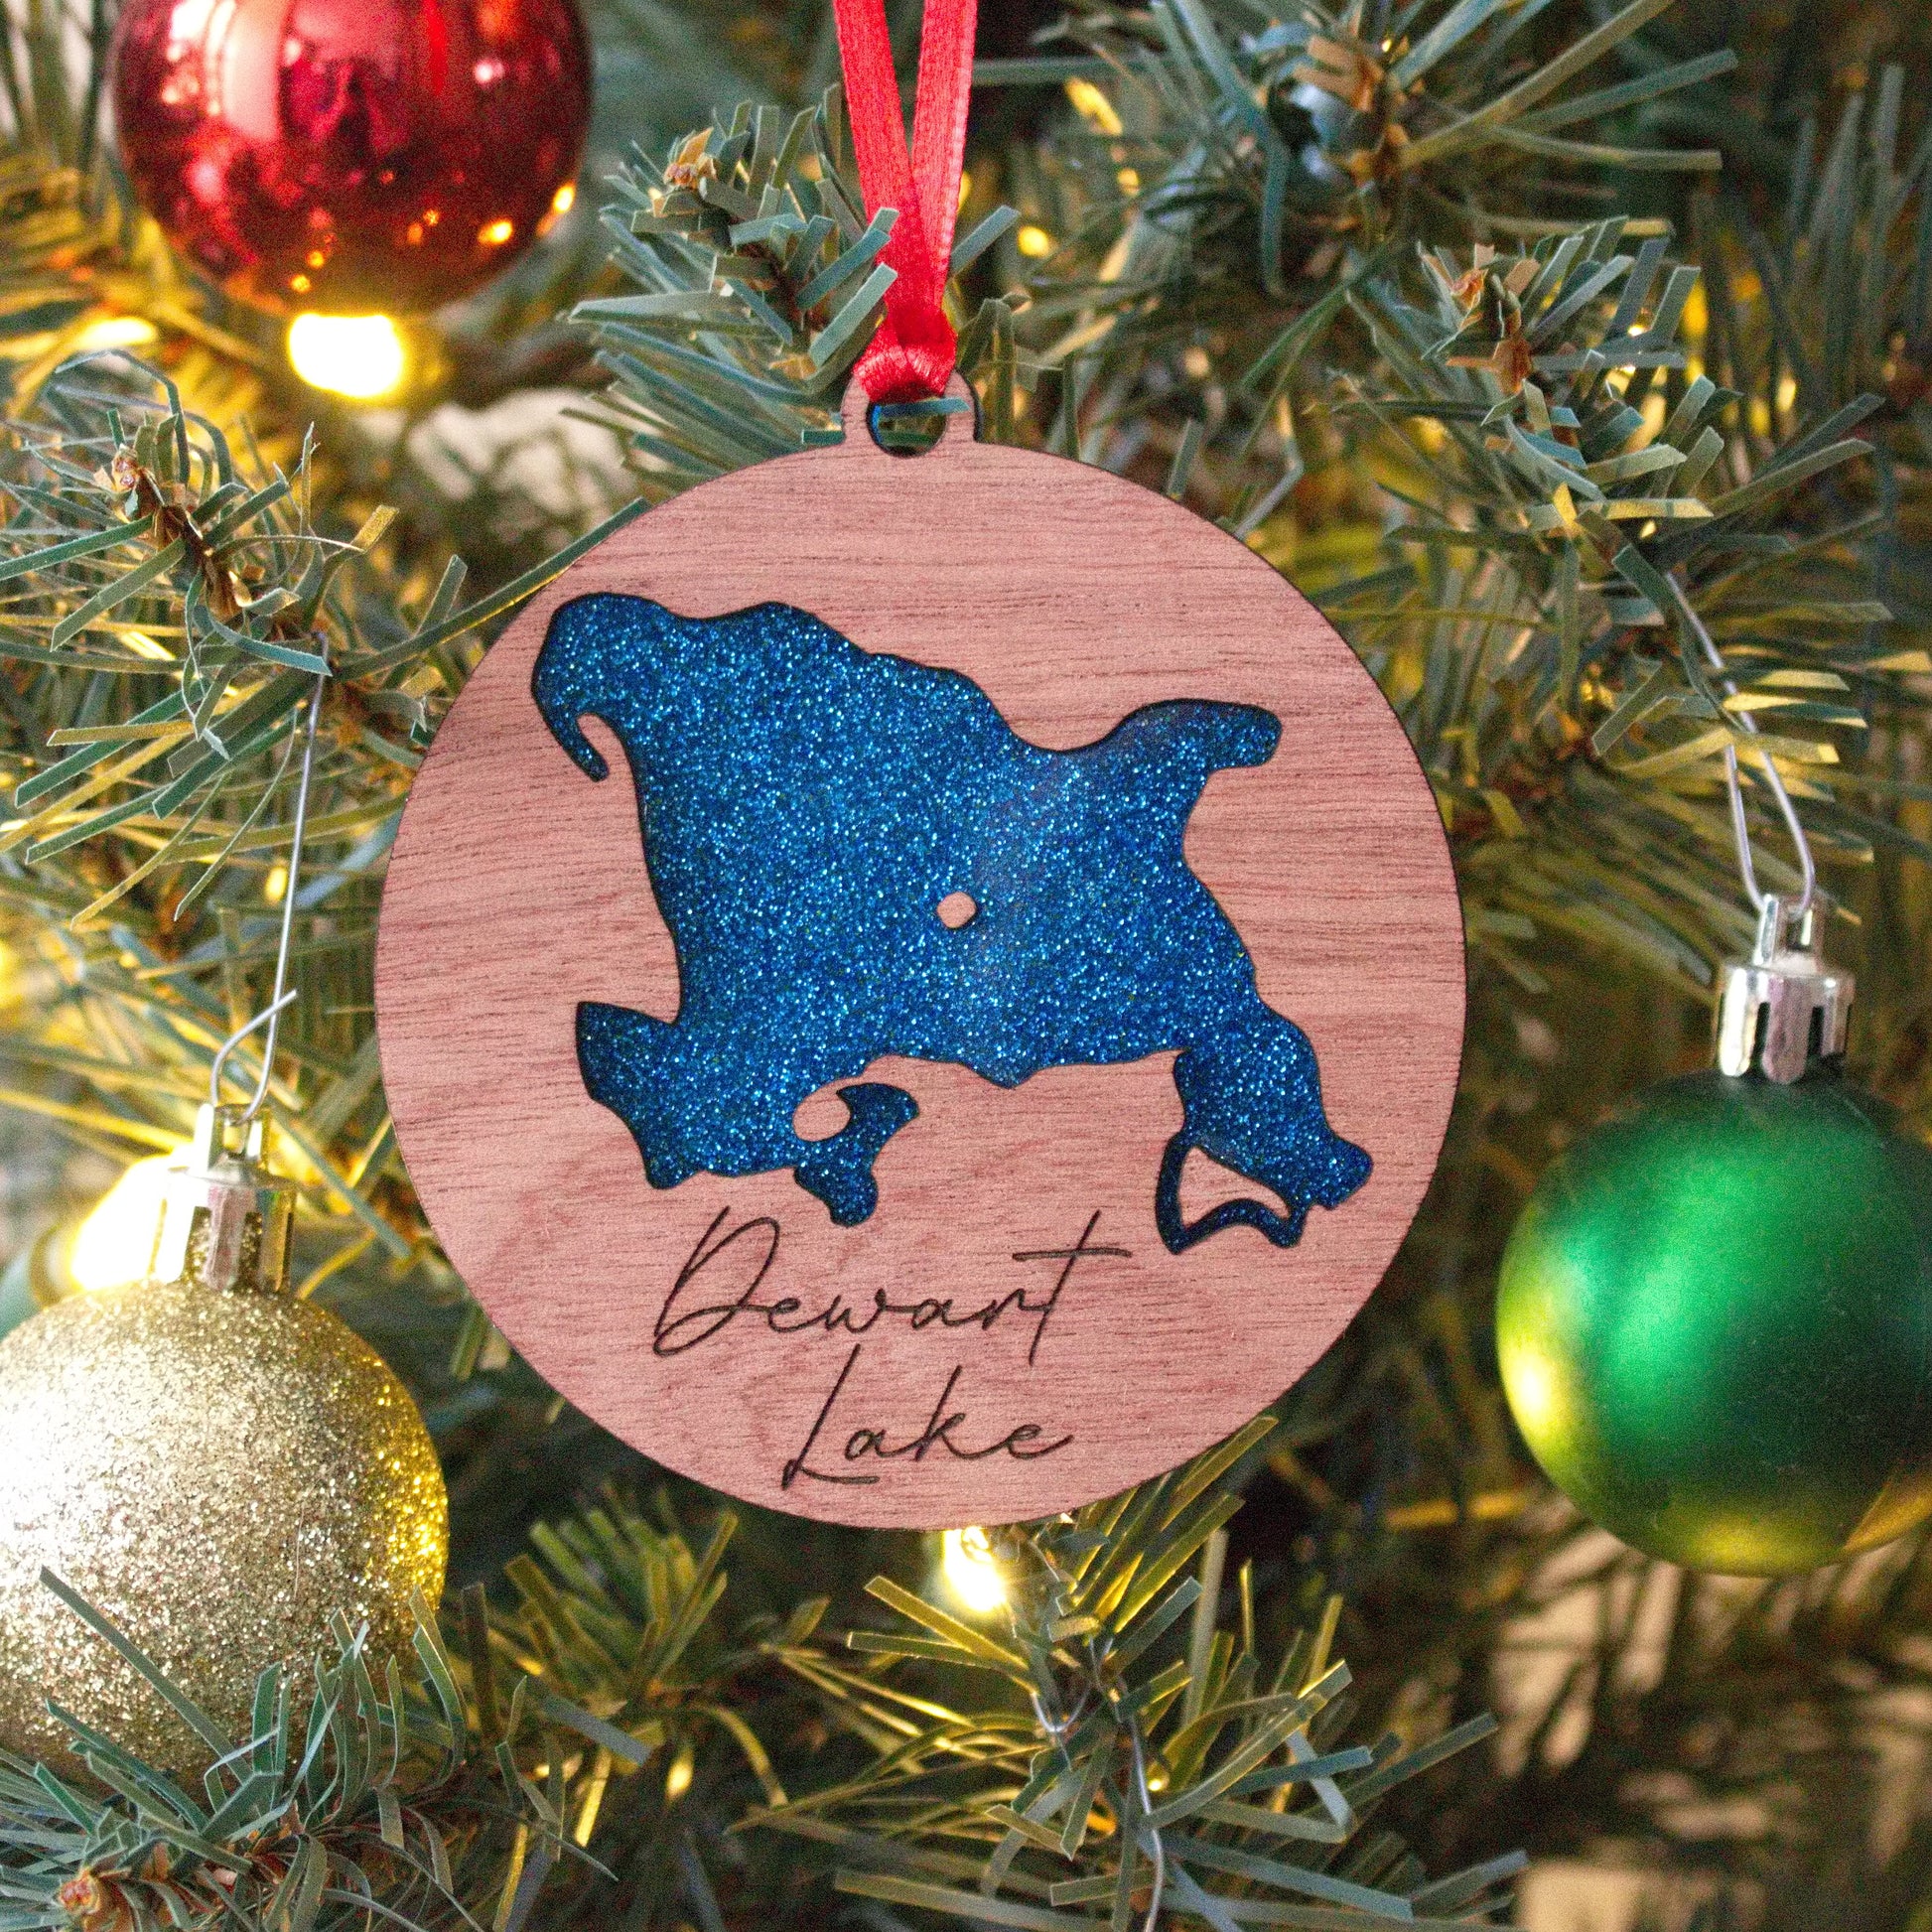 Dewart Lake Christmas ornament for the family to remember time spent together on the lake. Made out of wood and acrylic with attention to detail. This is something you will love.